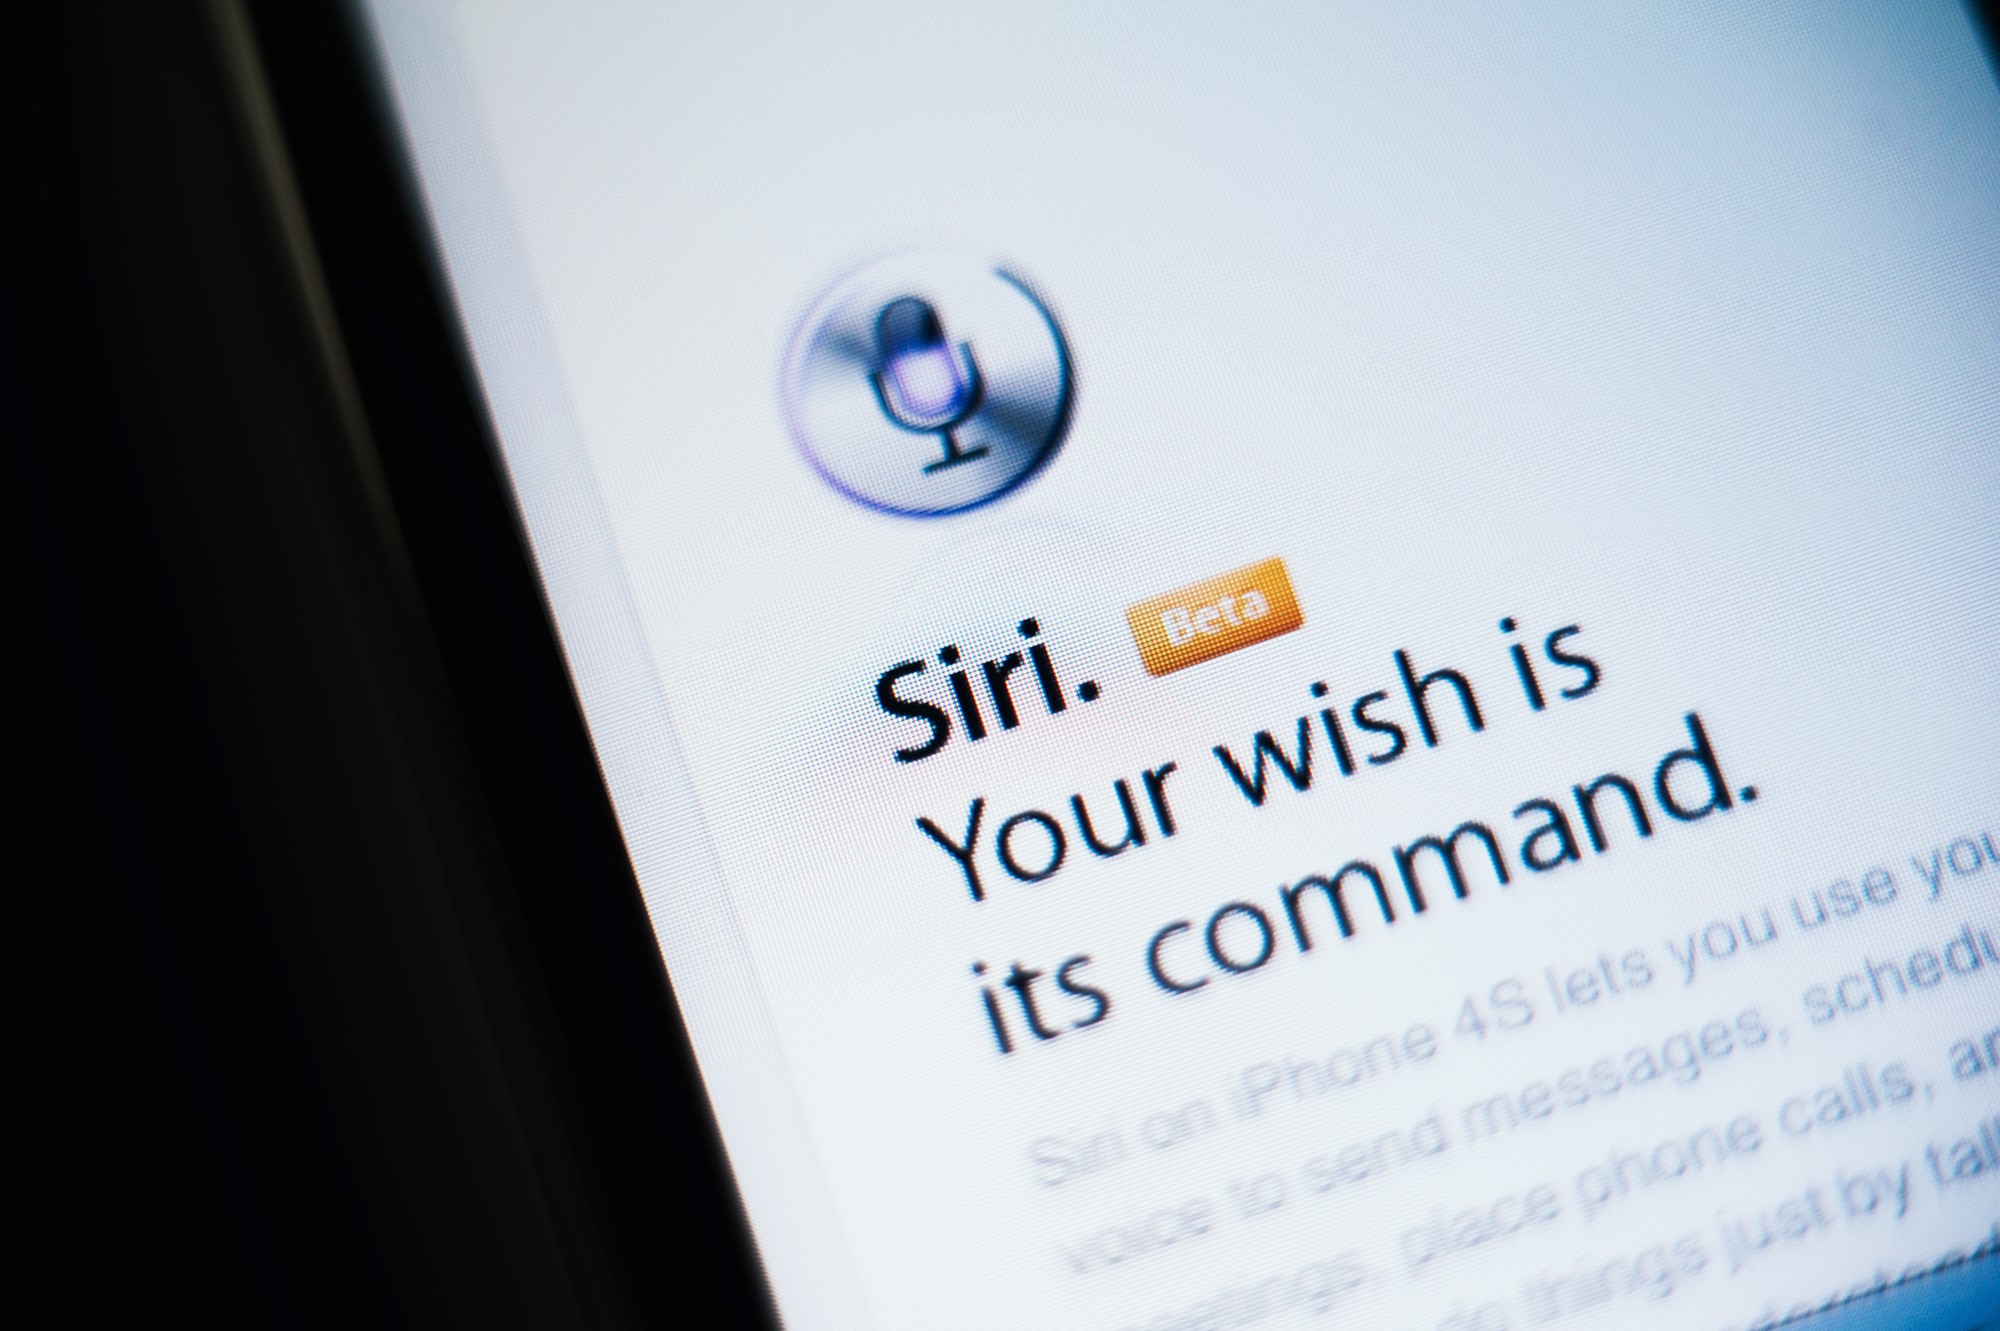 Siri — Your wish is its command